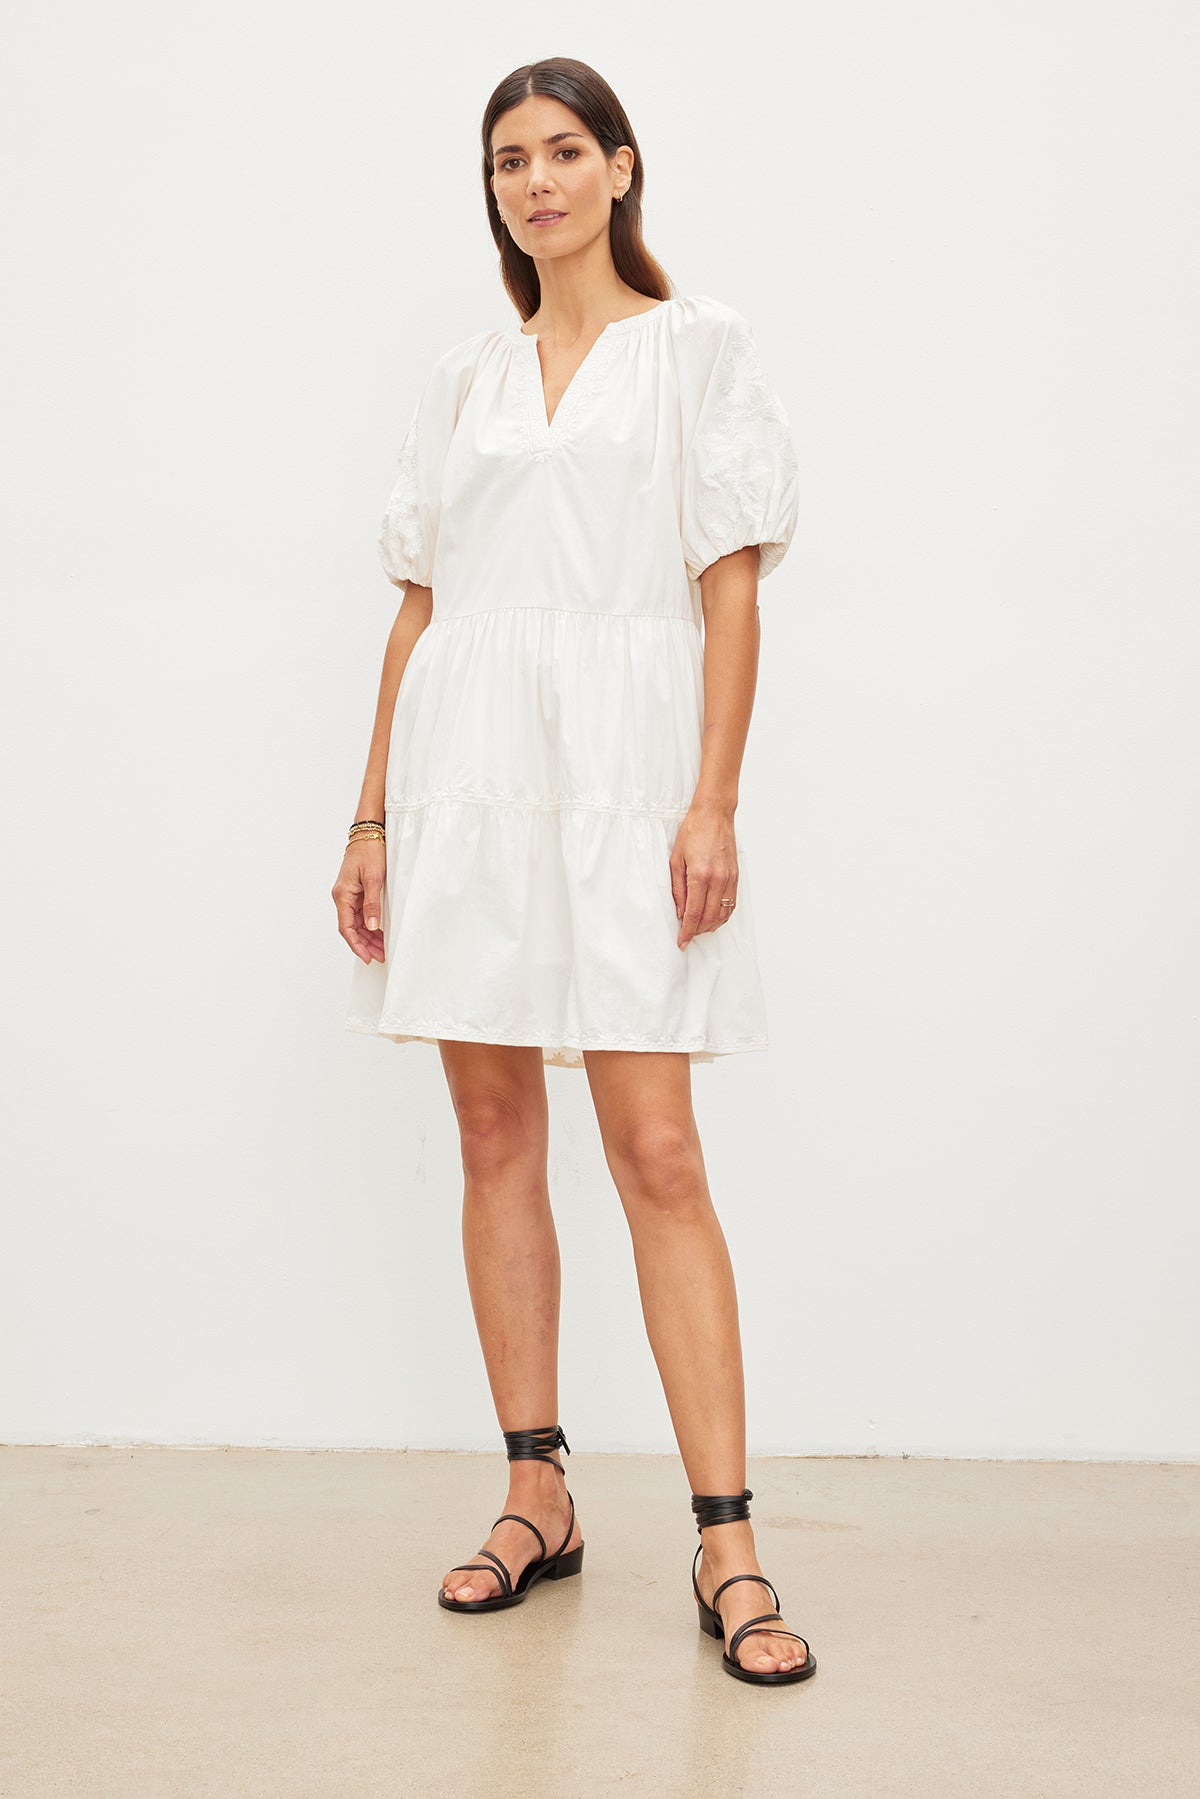   A woman stands in a white room, wearing a white, knee-length cotton dress with puffed sleeves and black sandals, looking directly at the camera. She is wearing the CHRISSY EMBROIDERED BOHO DRESS by Velvet by Graham & Spencer. 